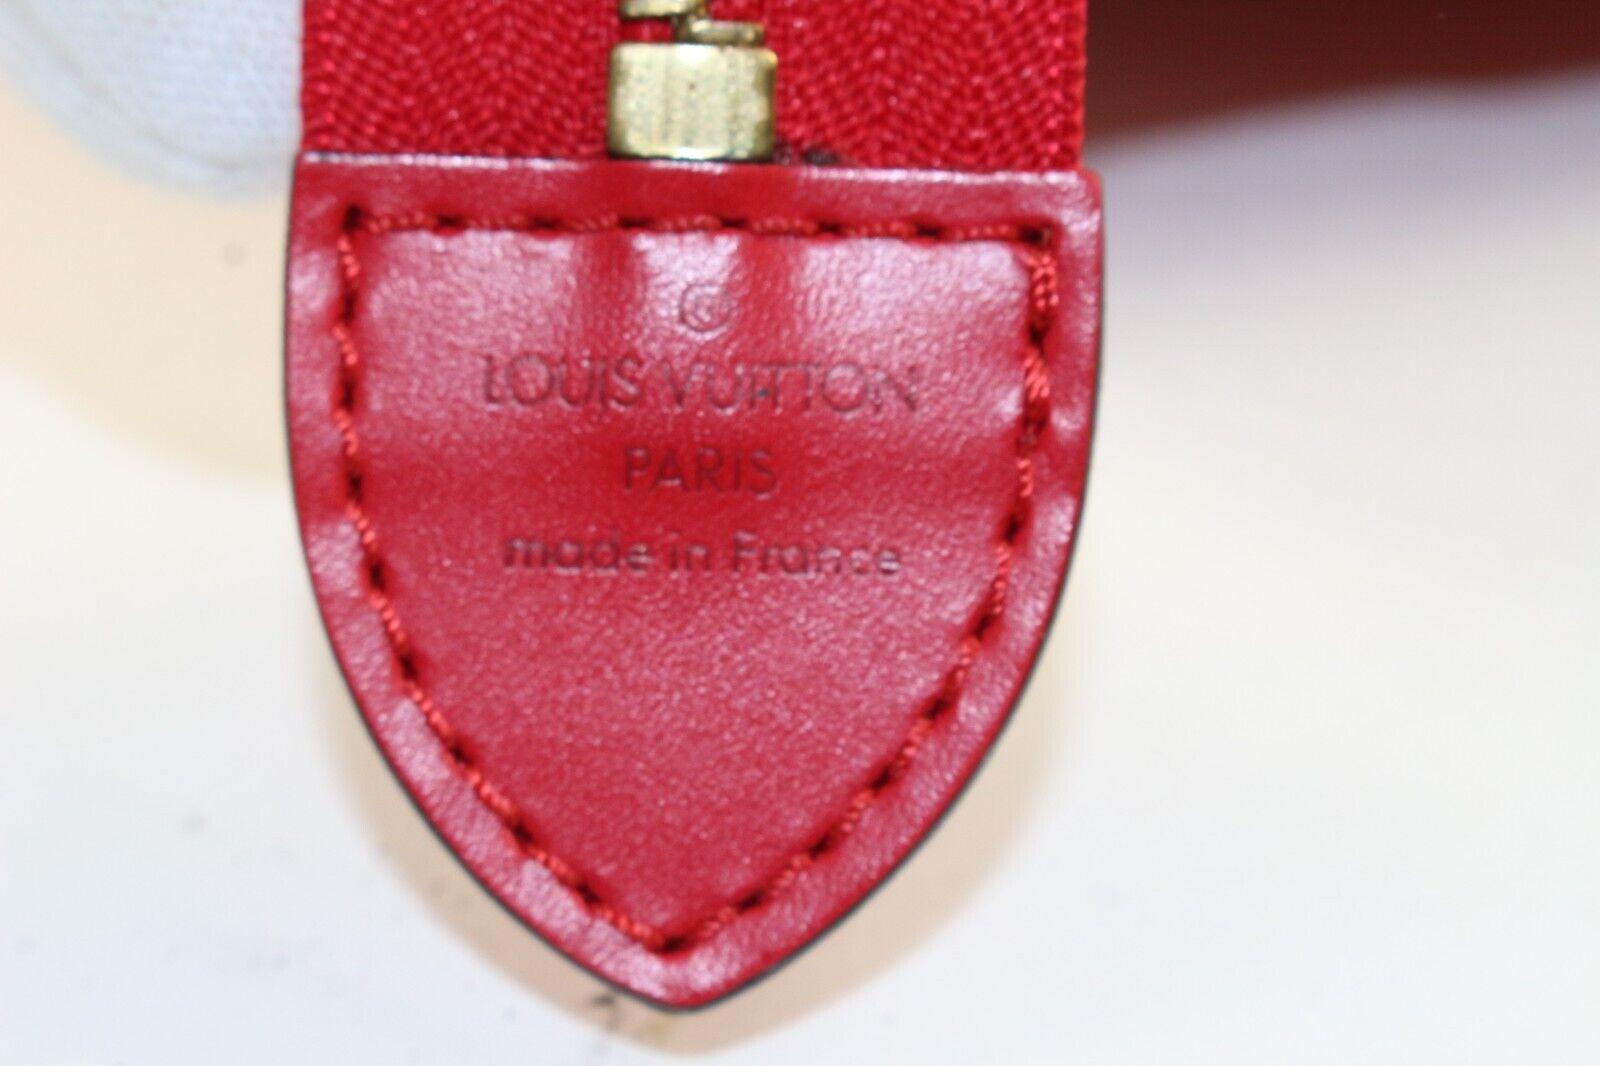 Louis Vuitton Riviera Top Handle Red Leather Monogram Epi 4LV1212K For Sale 6